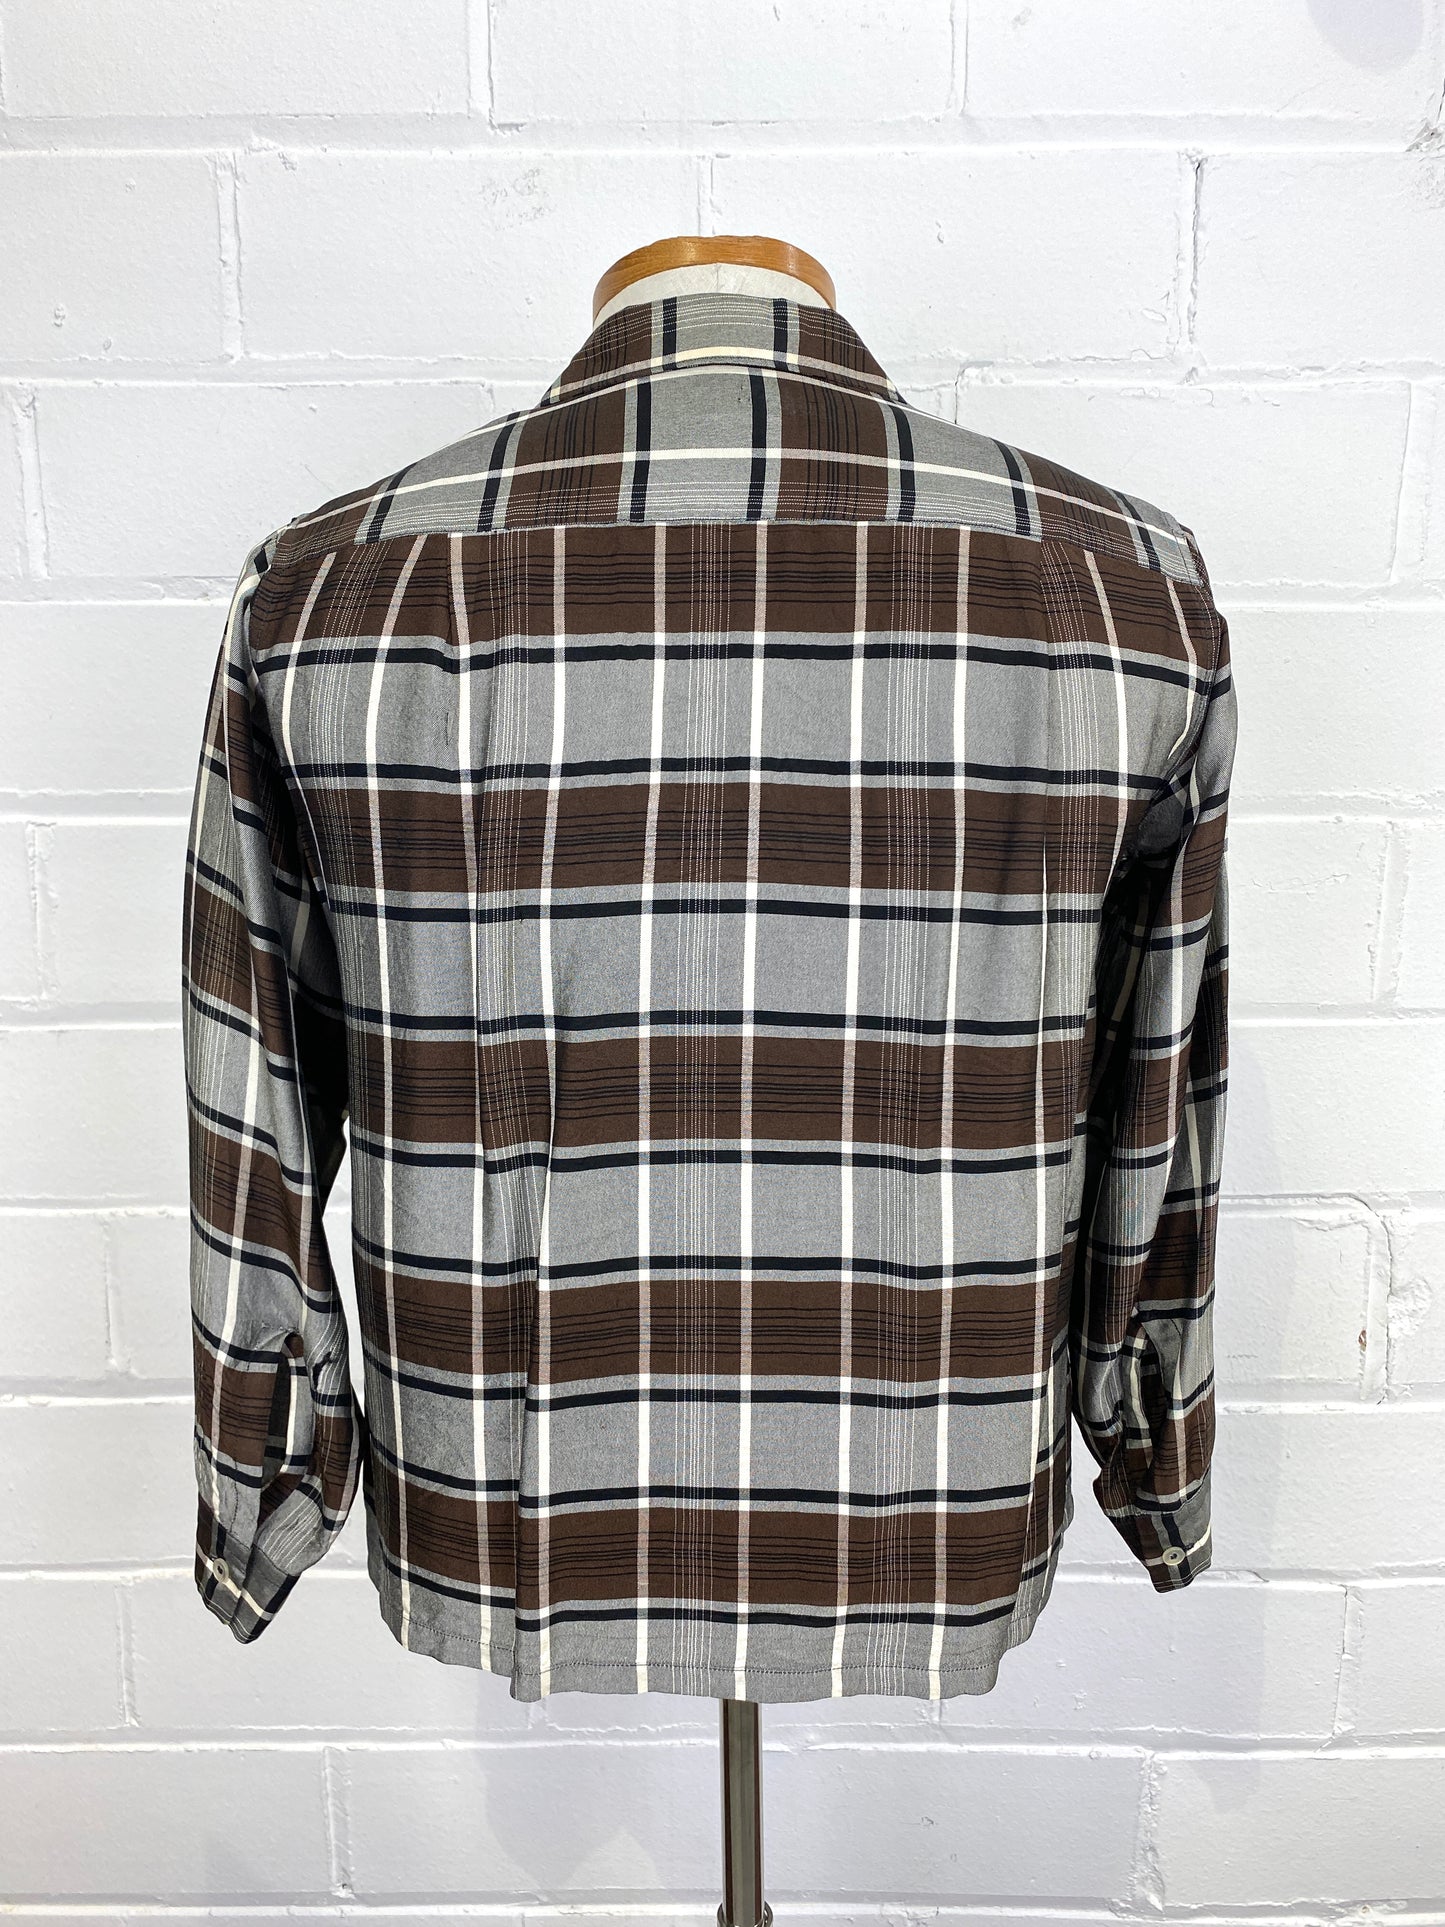 Vintage 1950s Penney's Towncraft Men's Brown Rayon Plaid Loop Collar Shirt, 15.5